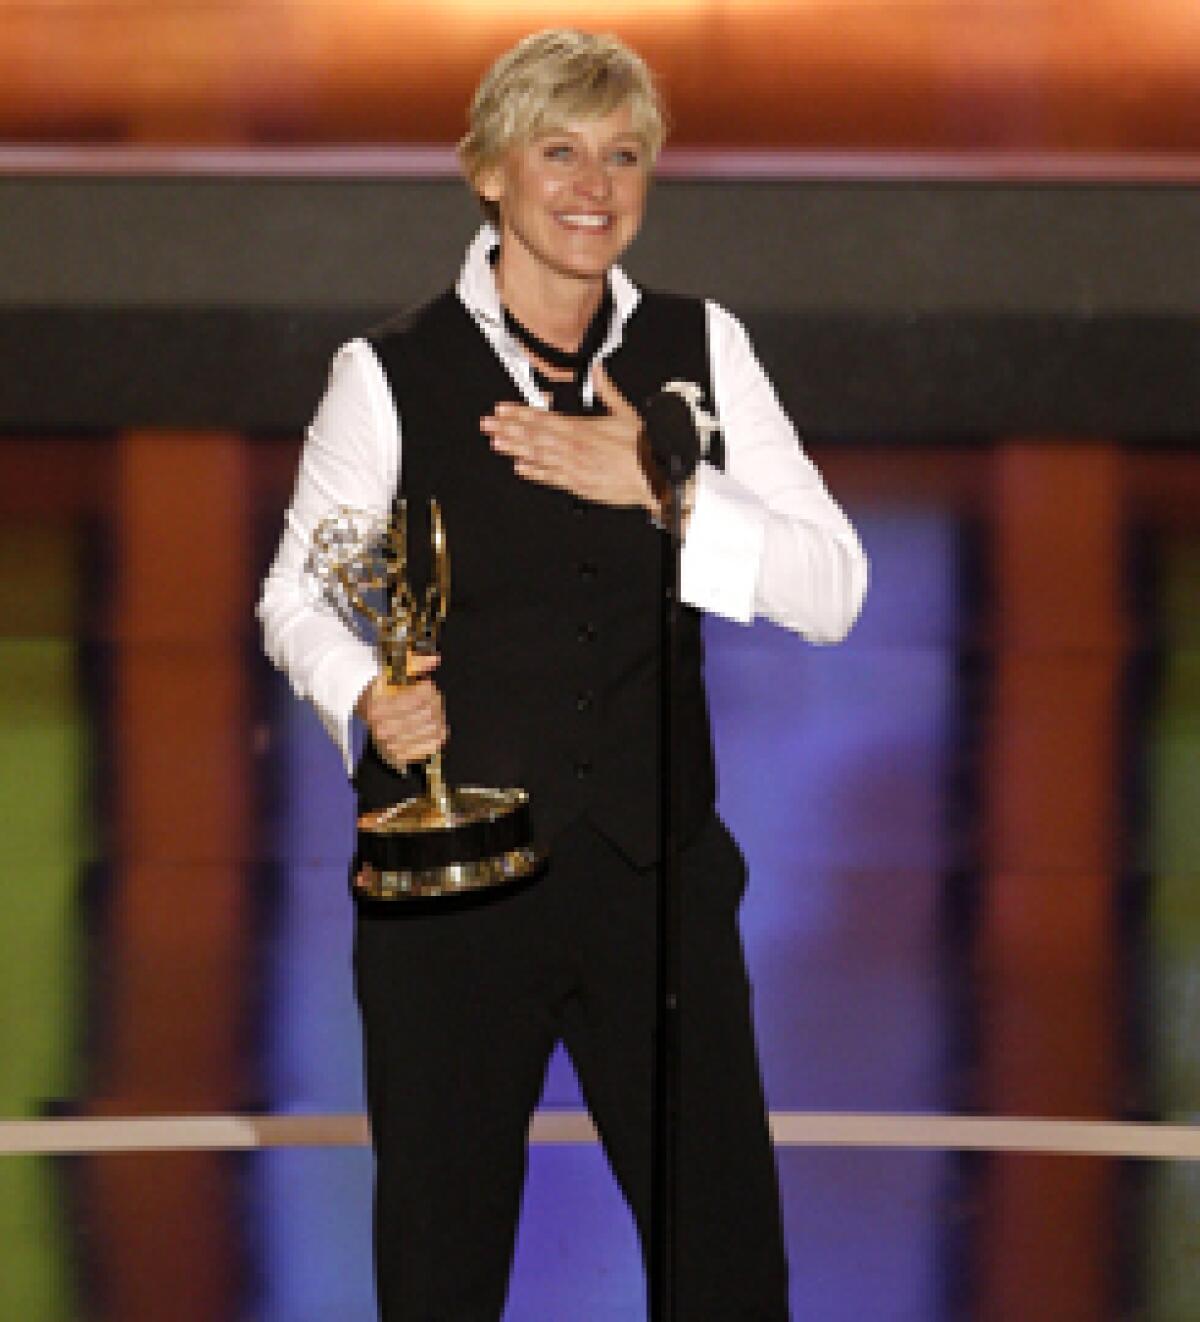 Ellen DeGeneres picked up her fourth consecutive Daytime Emmy for outstanding talk show host.